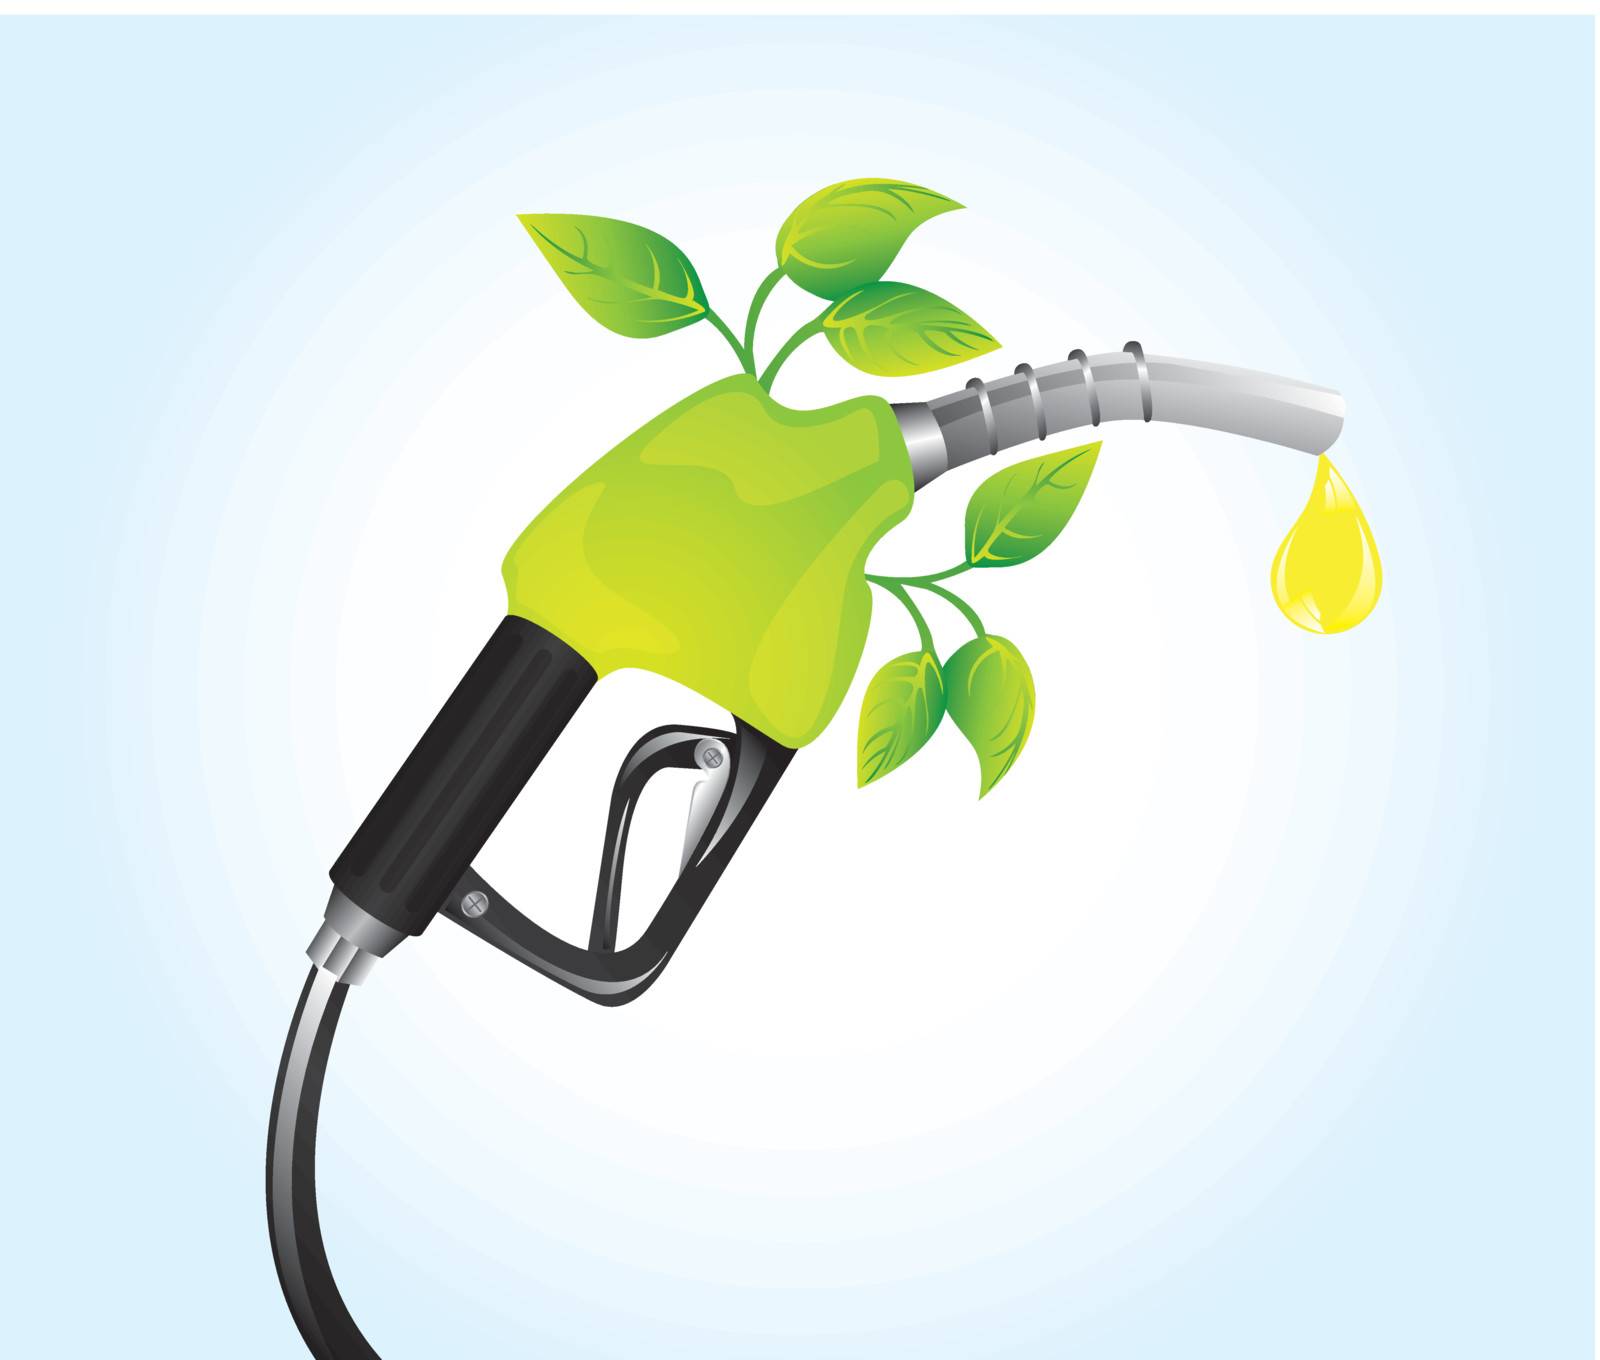 gasoline fuel with leaves over blue background. vector